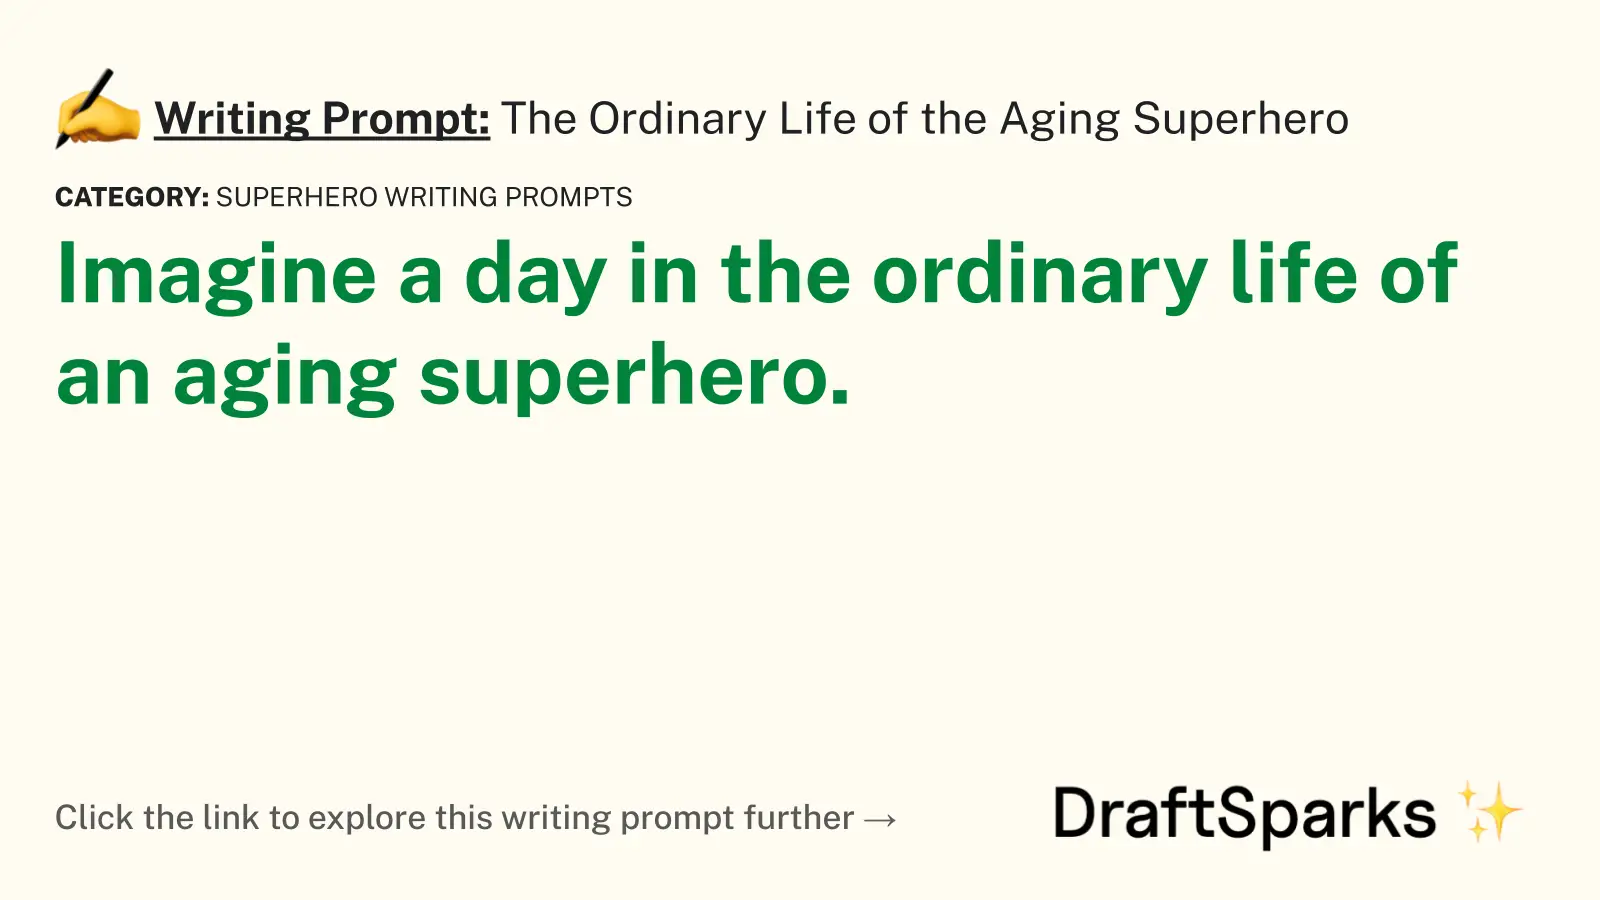 The Ordinary Life of the Aging Superhero